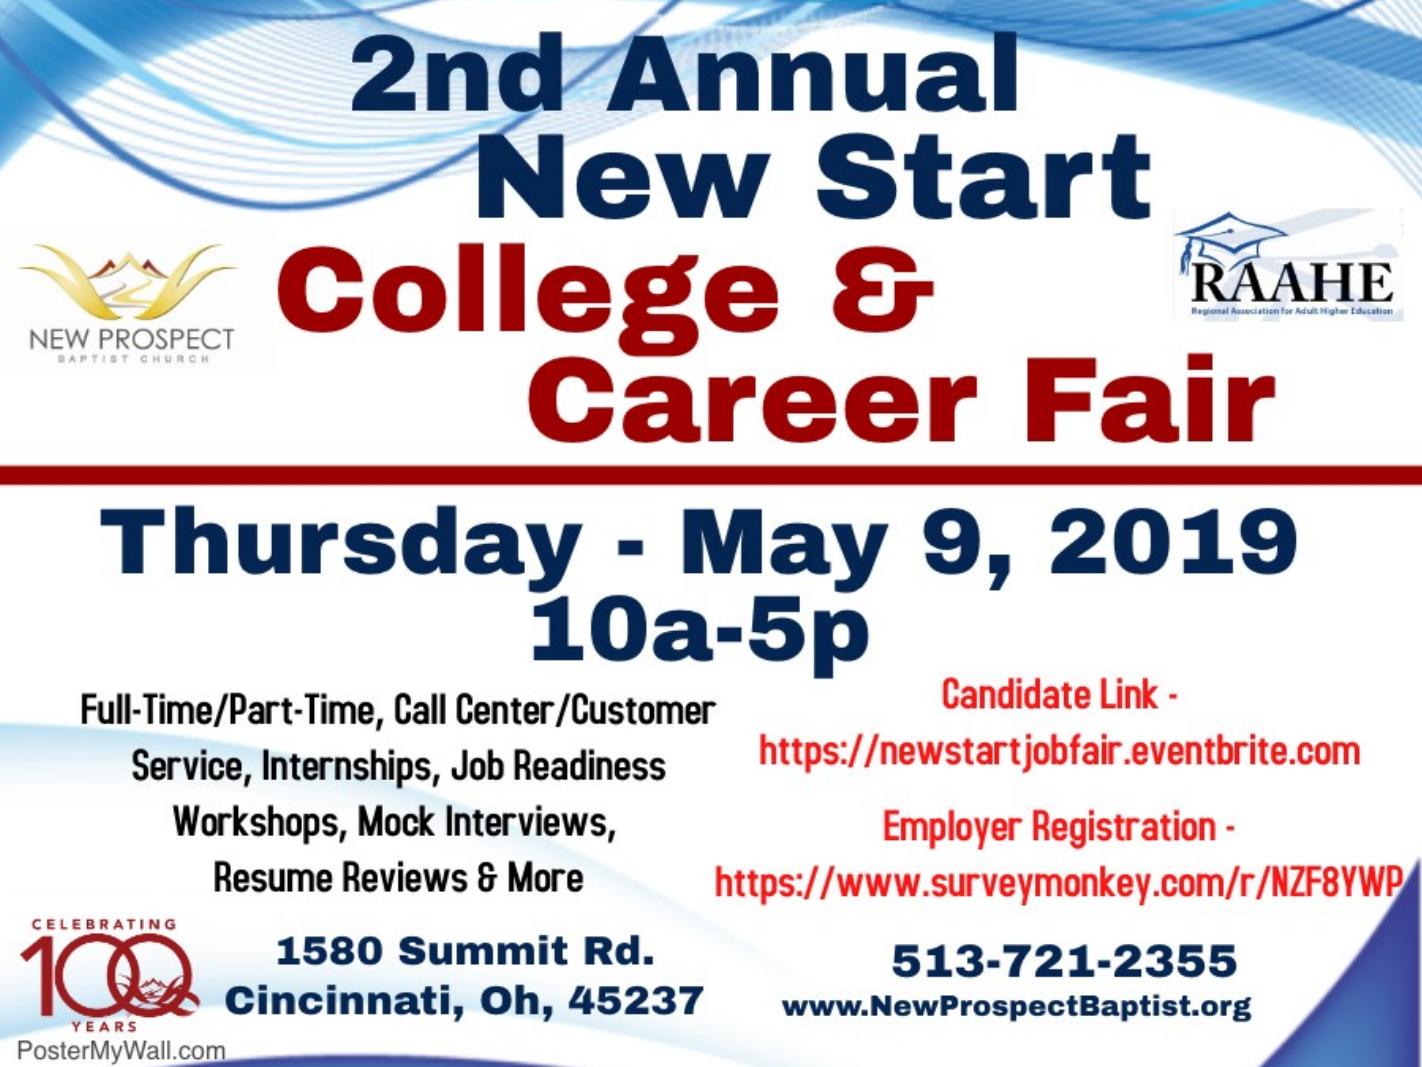 2nd Annual New Start College & Career Fair on Thursday May 9 2019 10 am - 5 pm at New Prospect